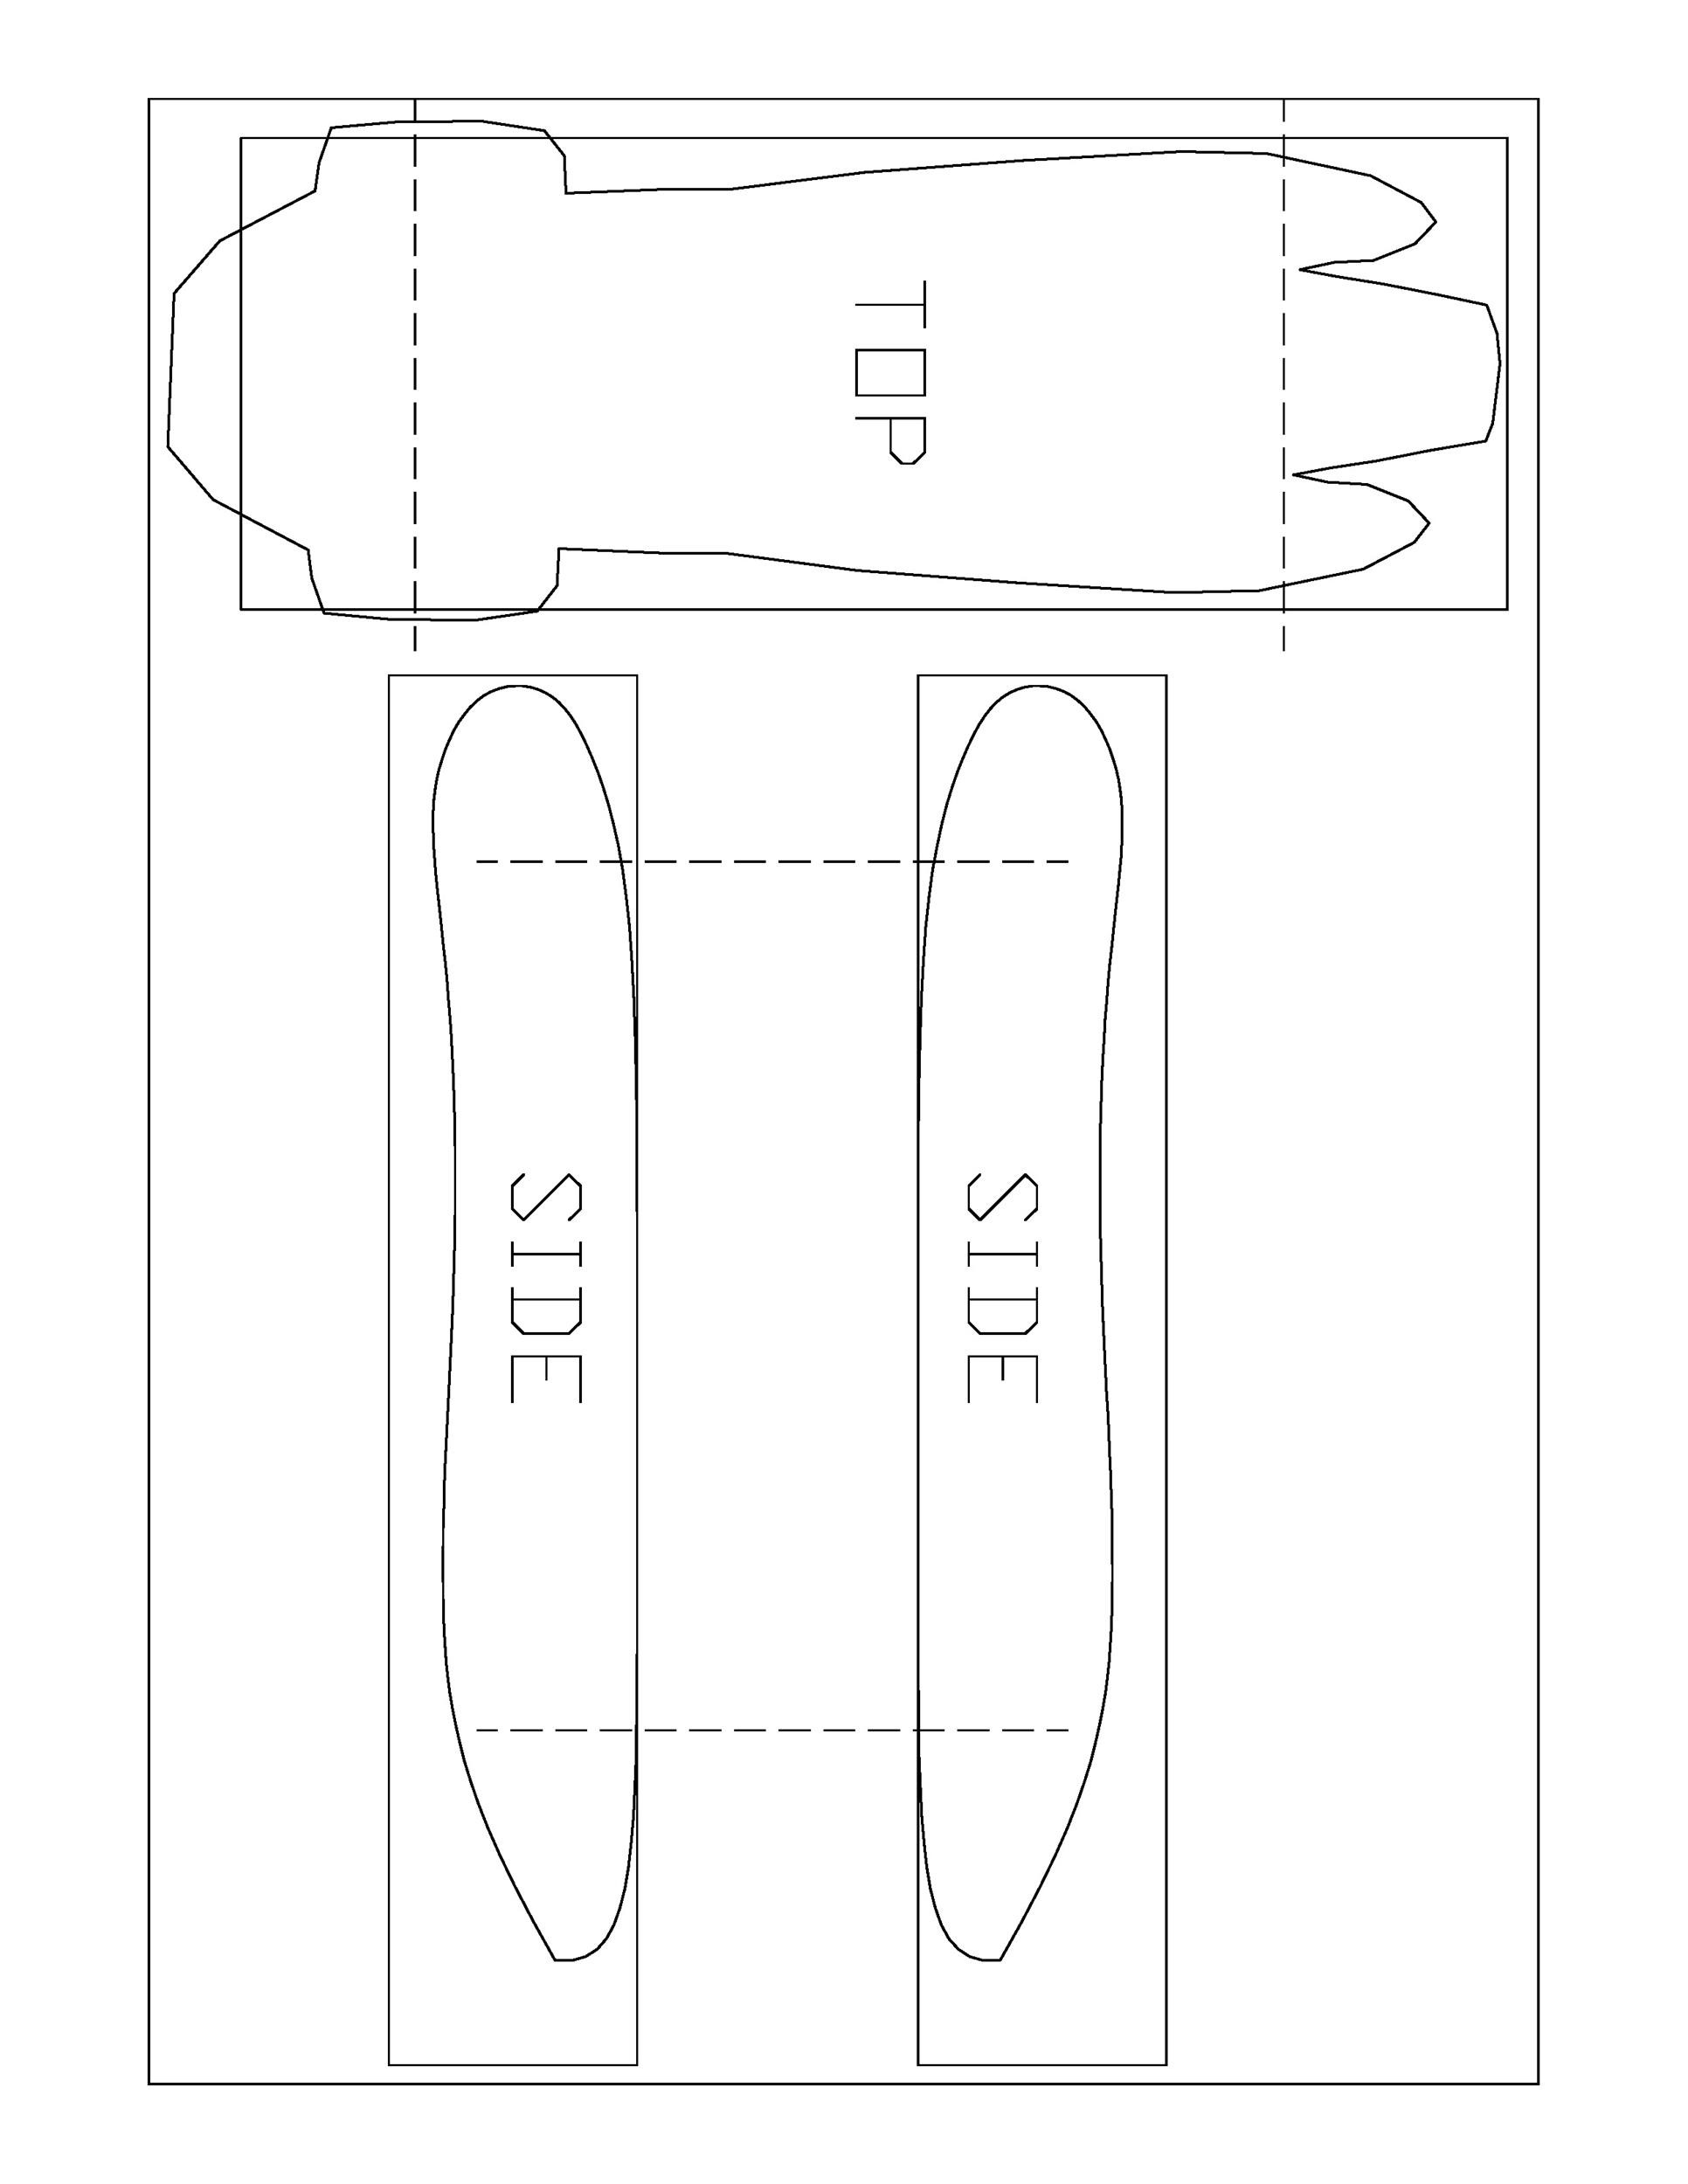 printable-pinewood-derby-templates